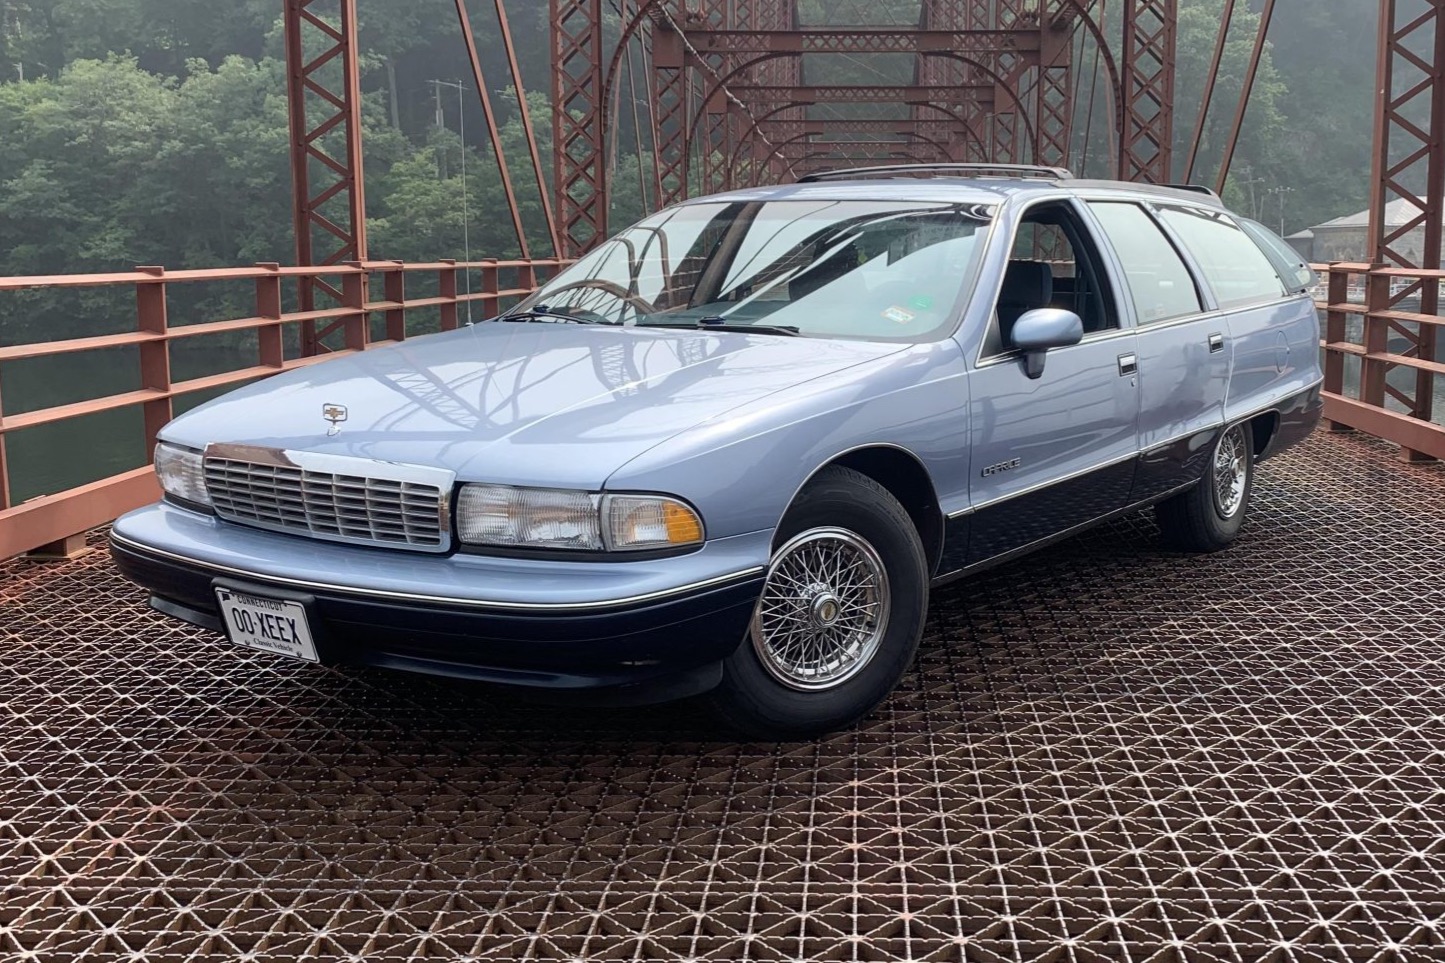 No Reserve: 9k-Mile 1993 Chevrolet Caprice Classic For Sale, 43% OFF